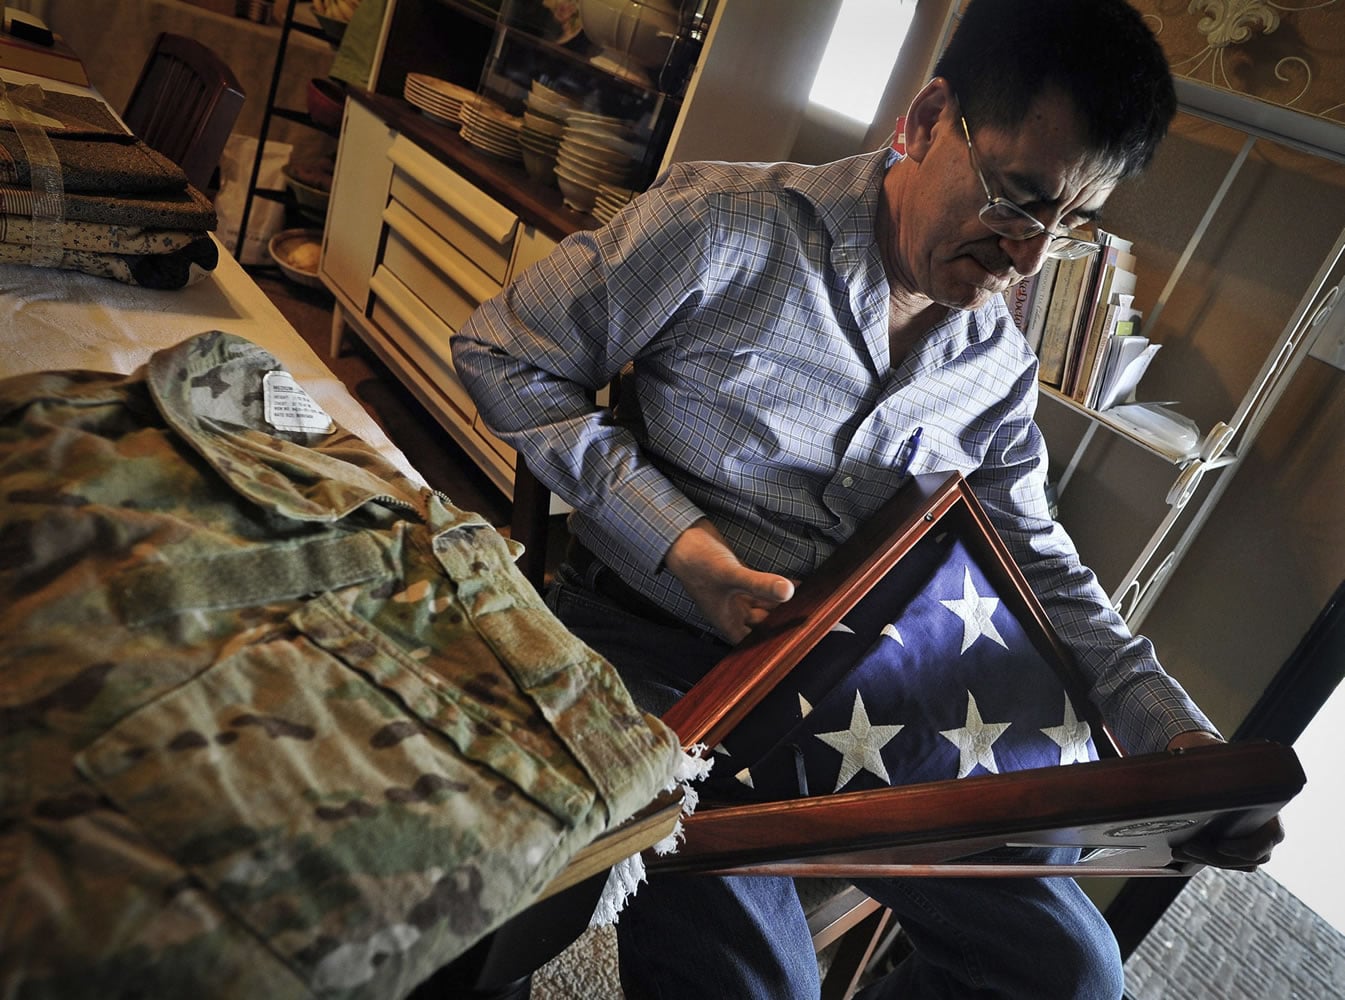 Next to the camouflage uniform of his late son, Army National Guard Spc. Benjamin Pleitez, Salvador Pleitez looks at the flag that draped his casket after he was killed in Mazar-e-Sharif, Afghanistan in 2012.